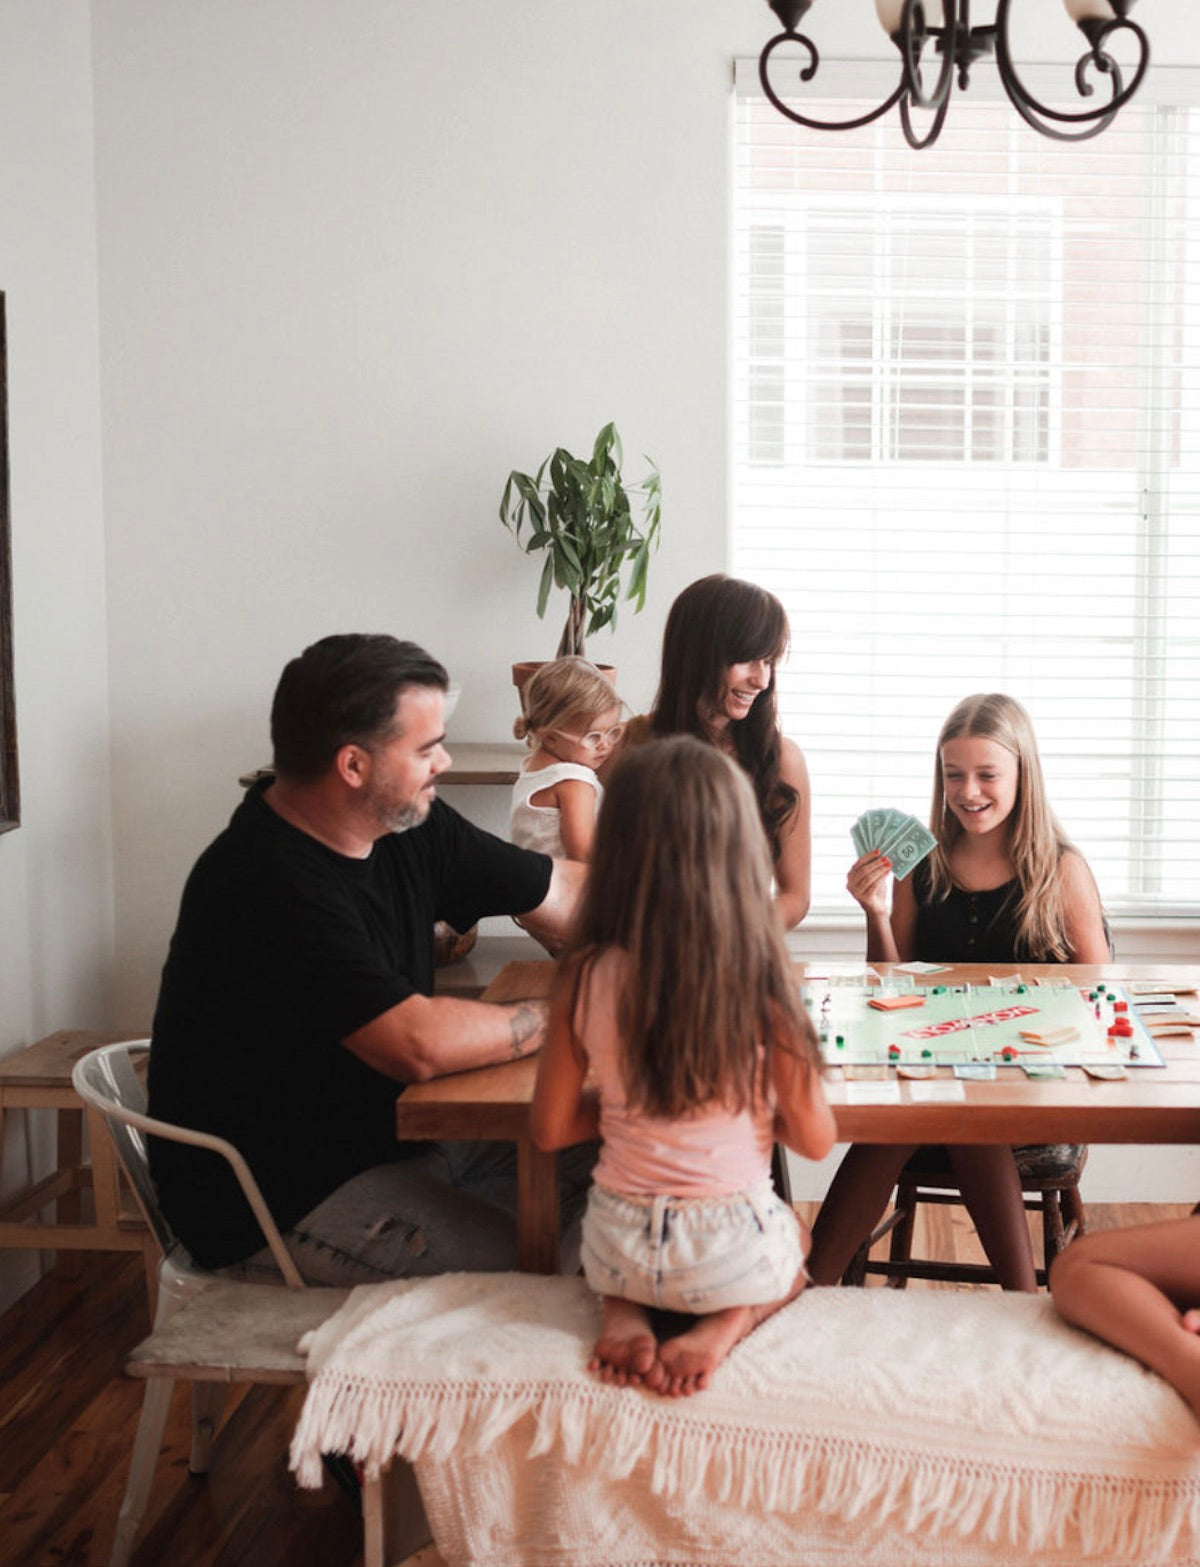 10 Family Activities You've Never Thought to Do. Family of five sit around a table and bond over playing board games together.